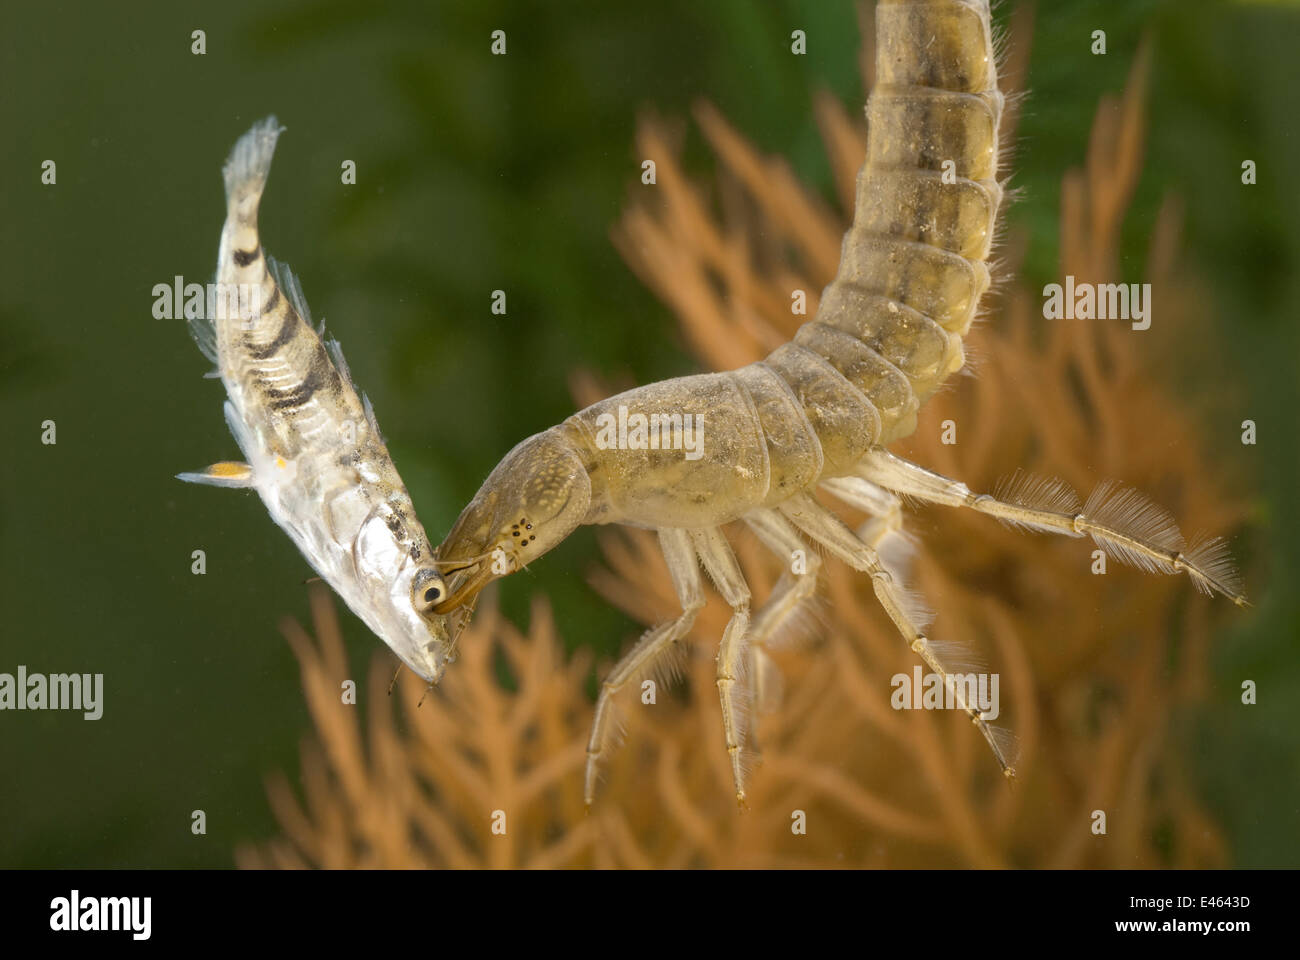 Great Diving Beetle (Dytiscus marginalis) larva feeding on small fish. Czech Republic. Controlled conditions. Stock Photo